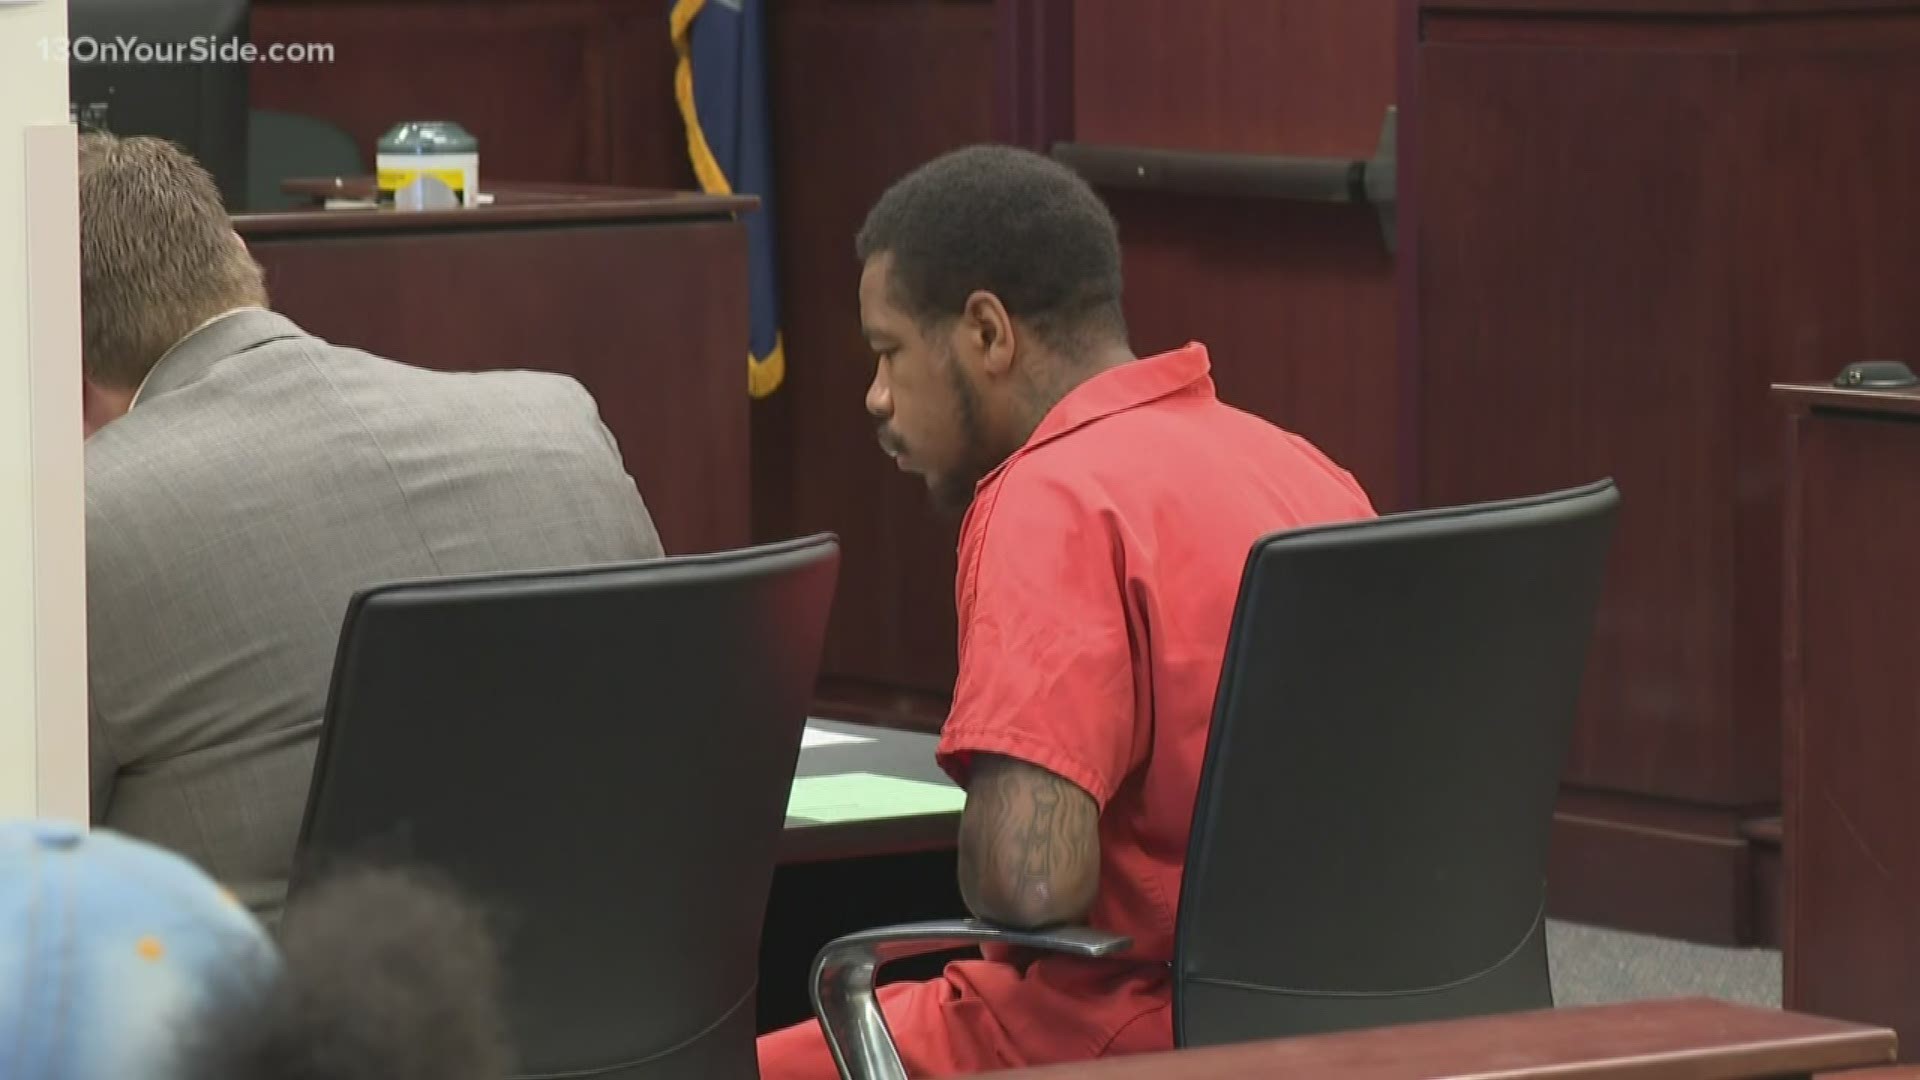 Dayvon Davis was originally charged with assault to do great bodily harm, but his charge was increased to assault with intent to murder on Tuesday.